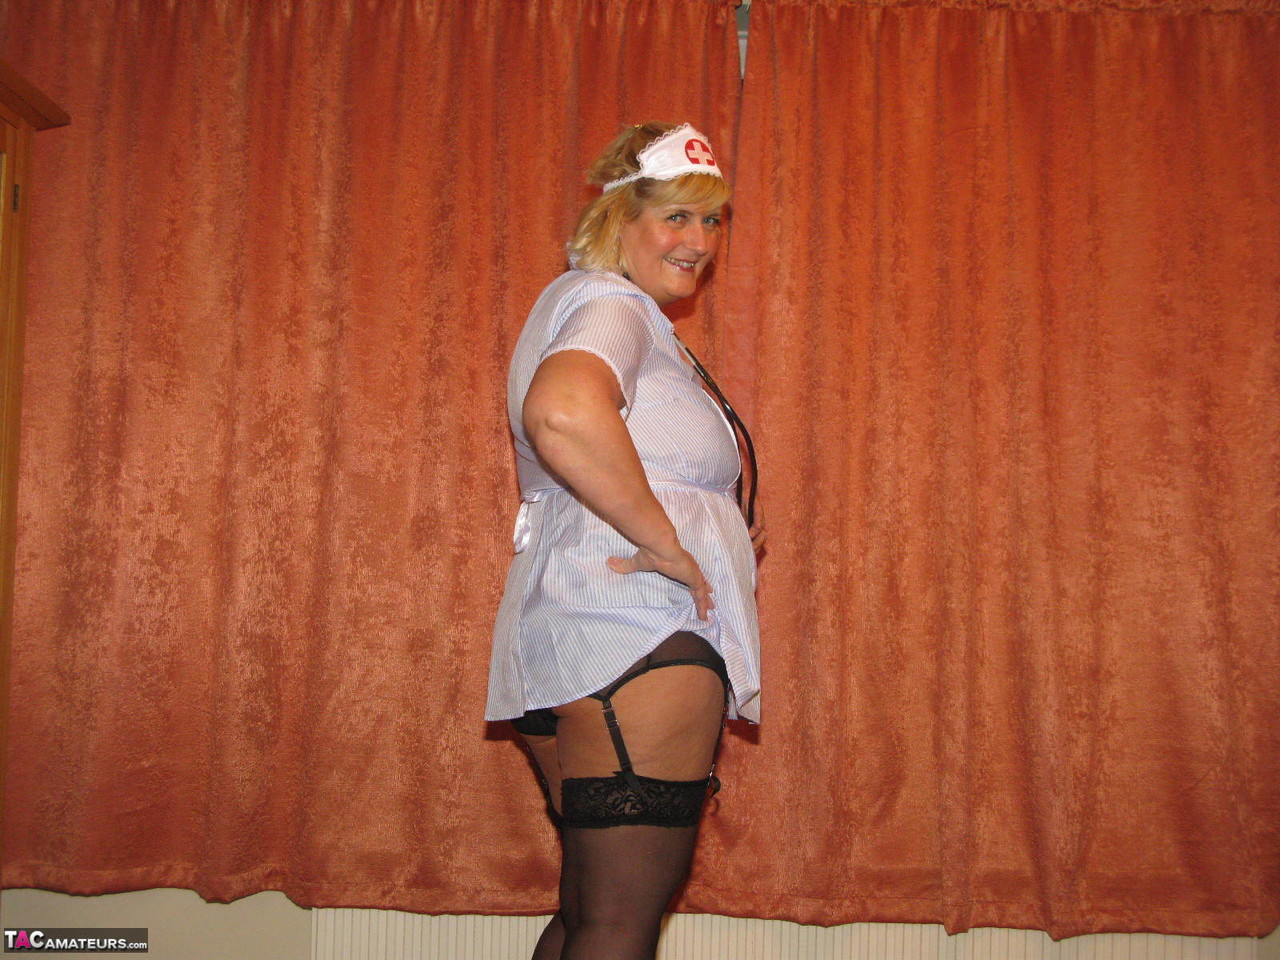 Fat nurse Chrissy Uk removes a surgical mask and uniform to model lingerie foto porno #424682140